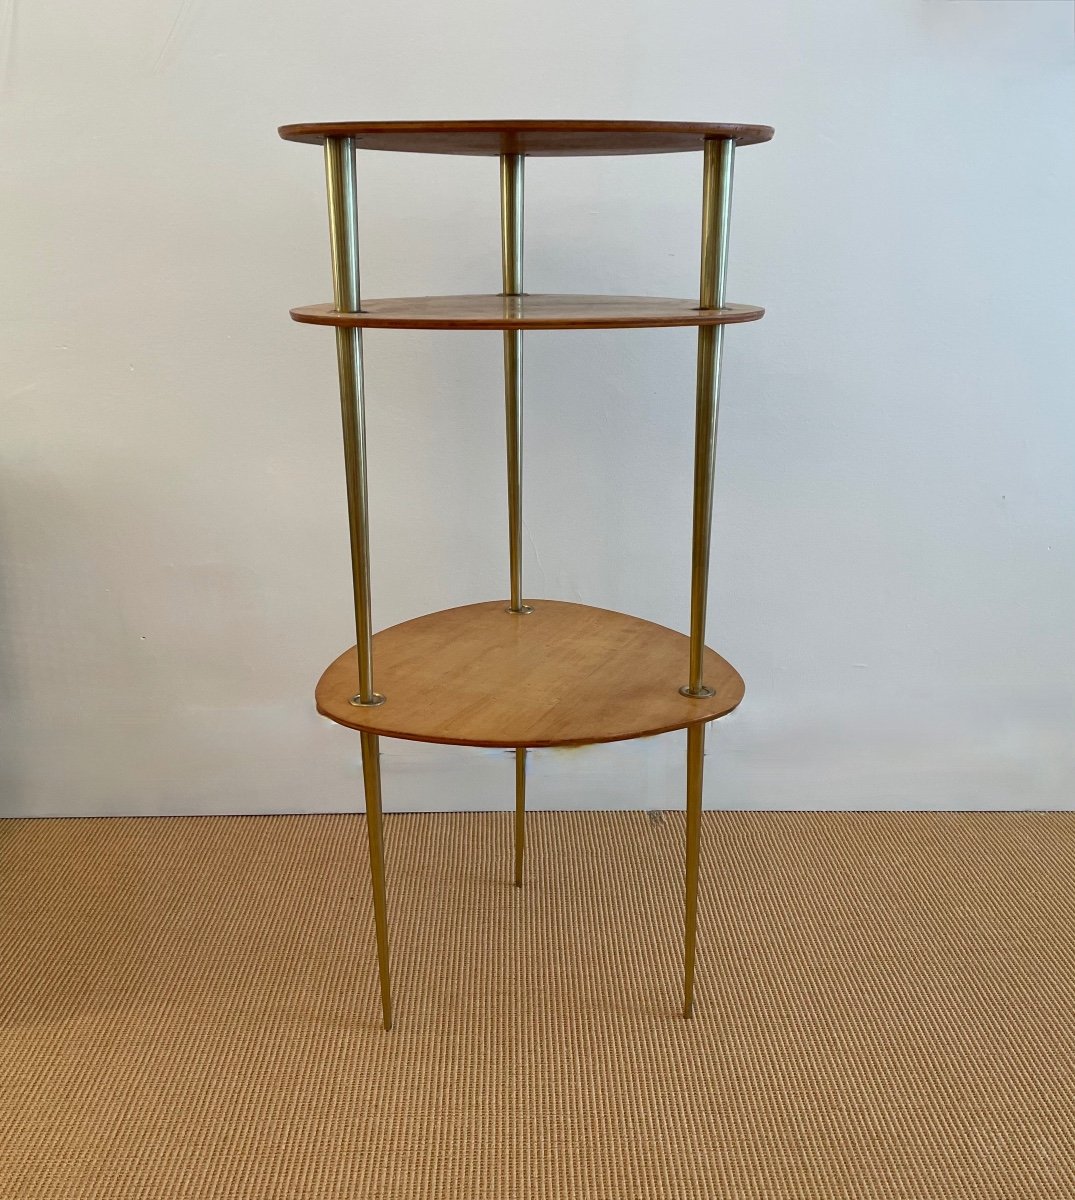 Suite Of 3 "patroy" Nesting Tables By Pierre Cruège For Formes, Circa 1950.-photo-3